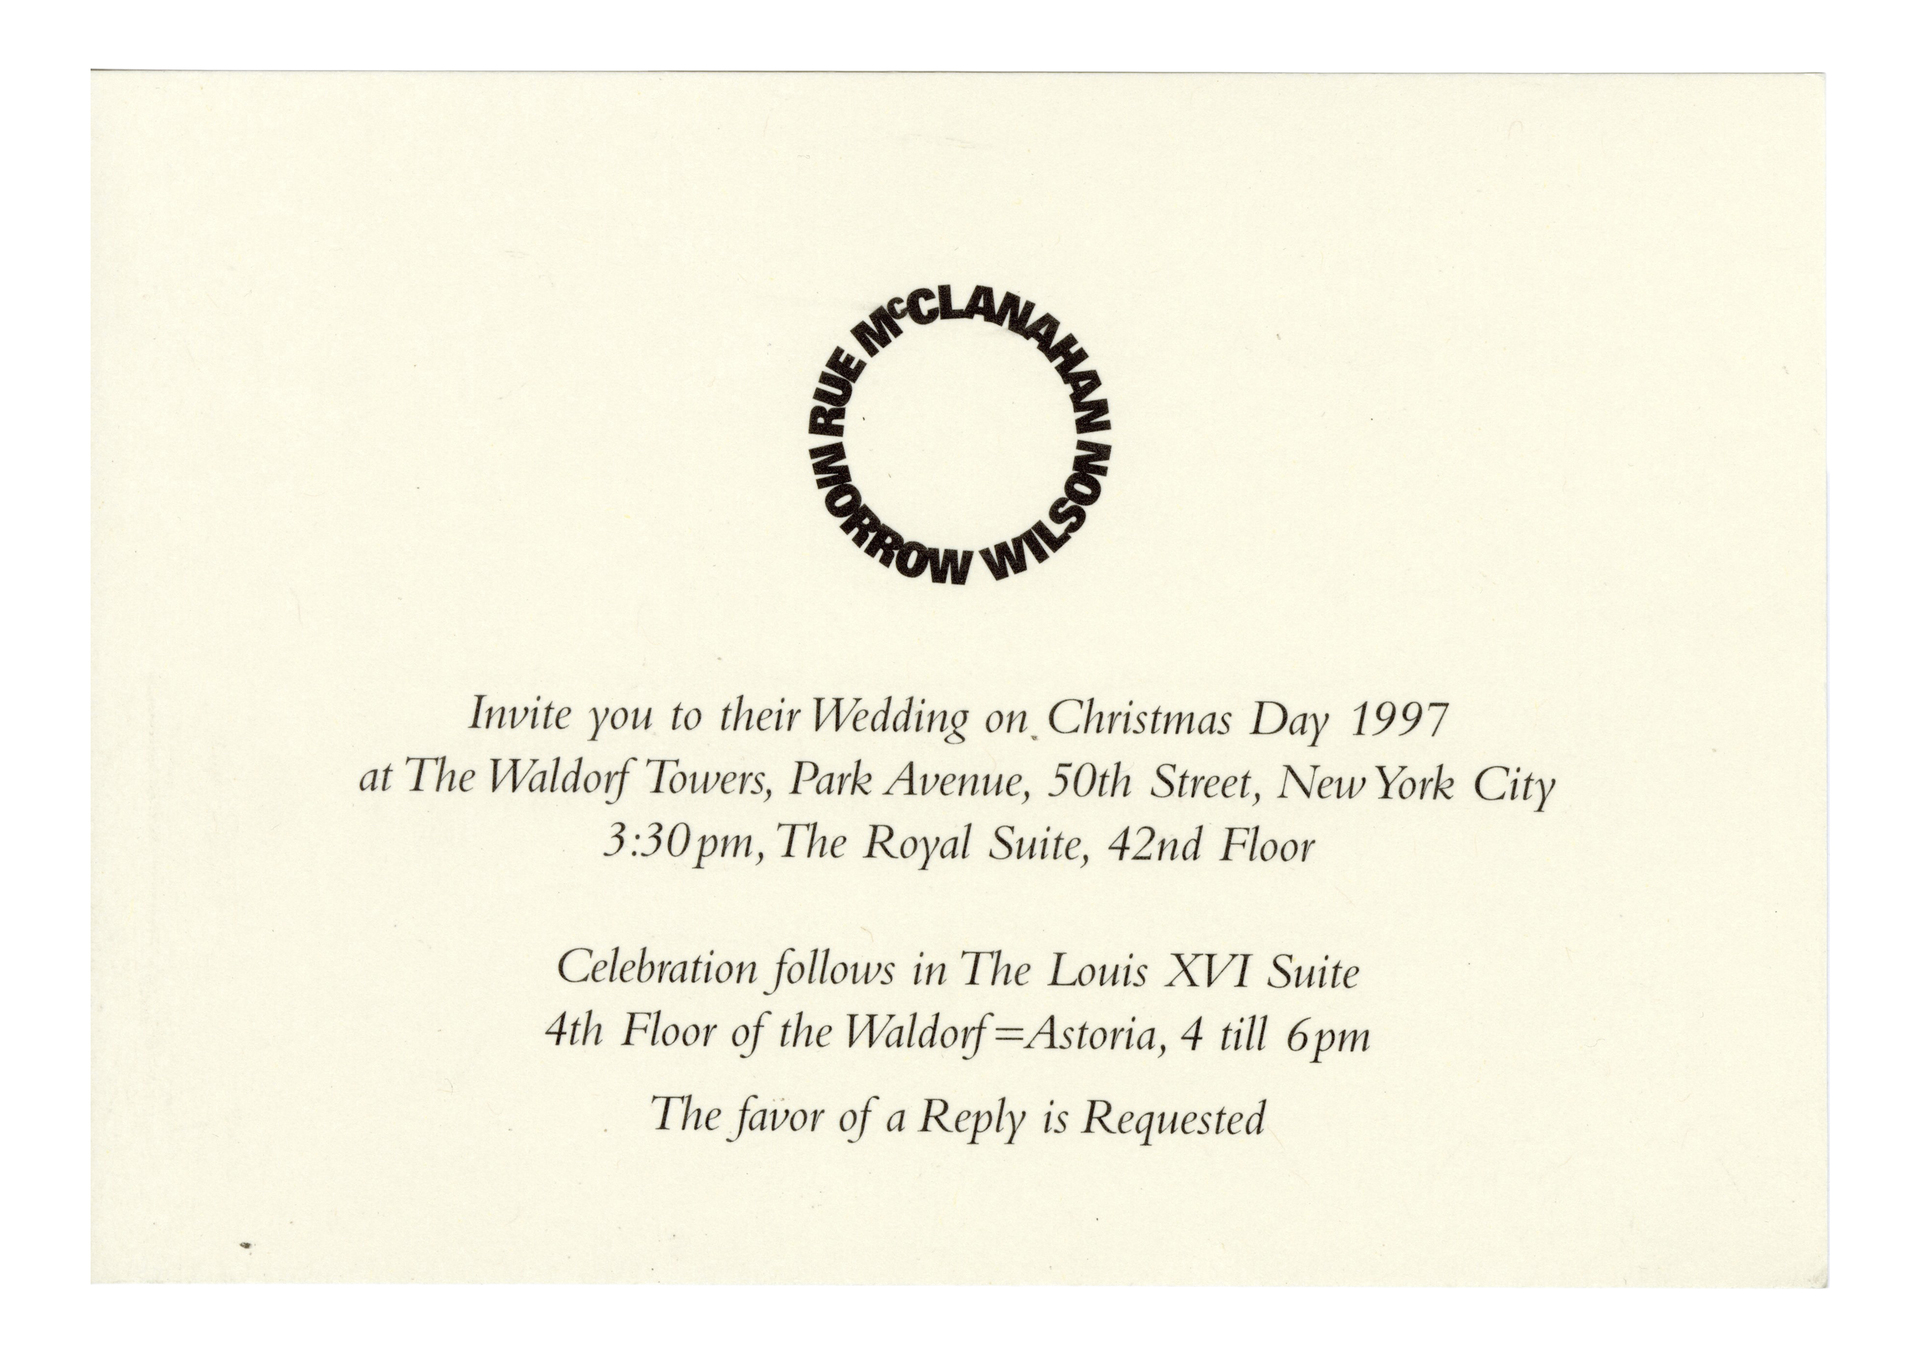 THE GOLDEN GIRLS (T.V. SERIES, 1985 - 1992) - Rue McClanahan's Wedding Invitation and Mail with TV G - Image 12 of 13